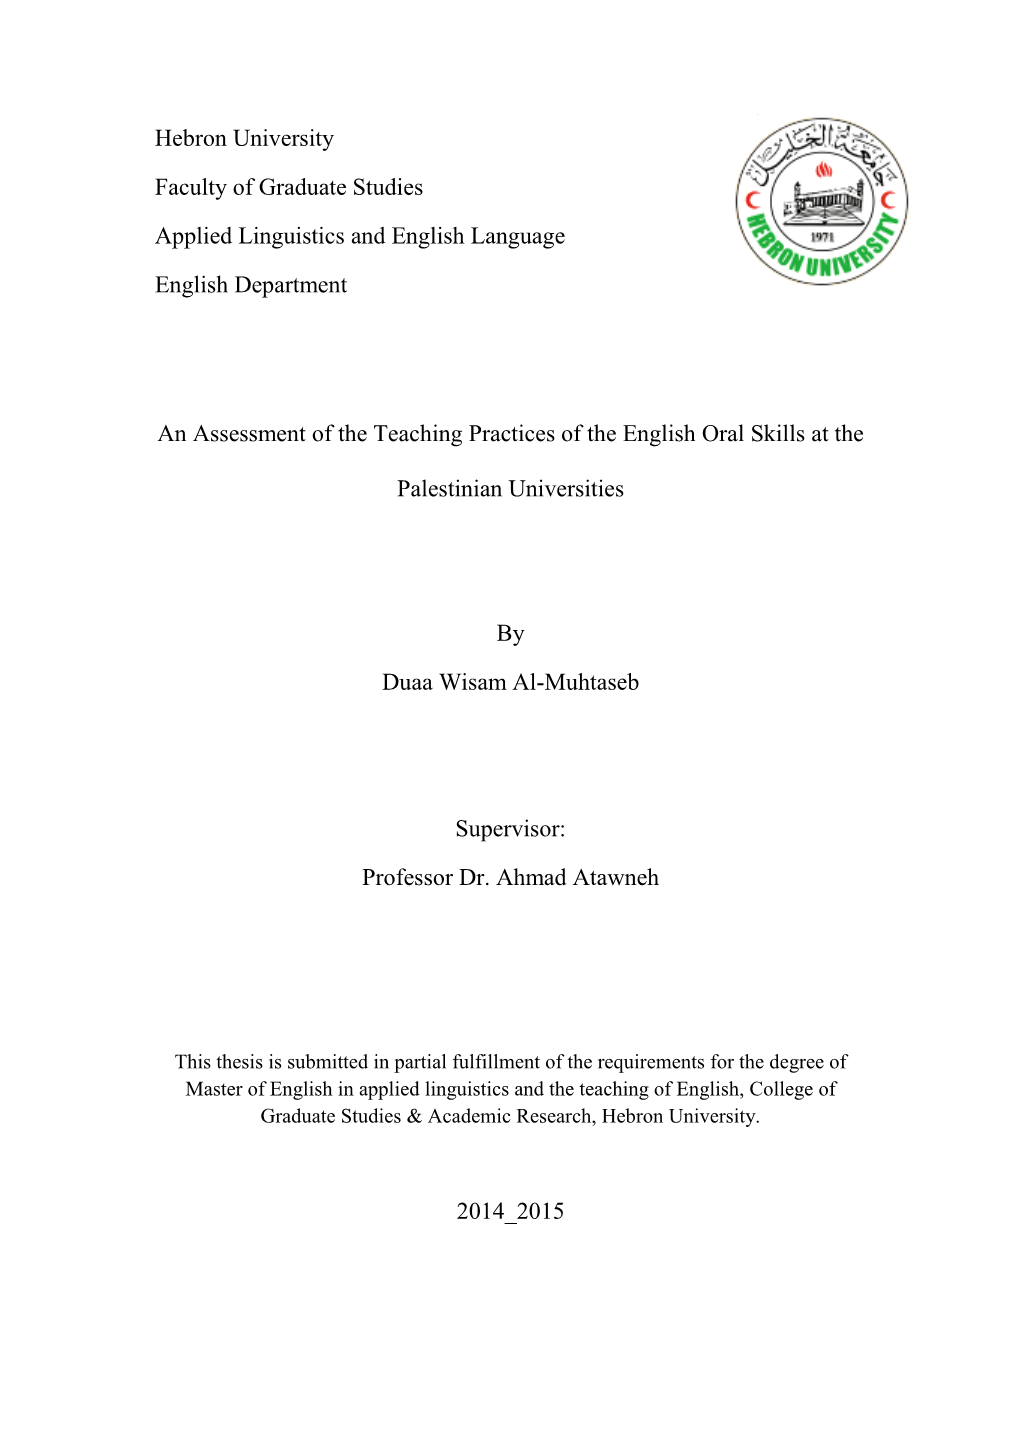 An Assessment of the Teaching Practices of the English Oral Skills at The